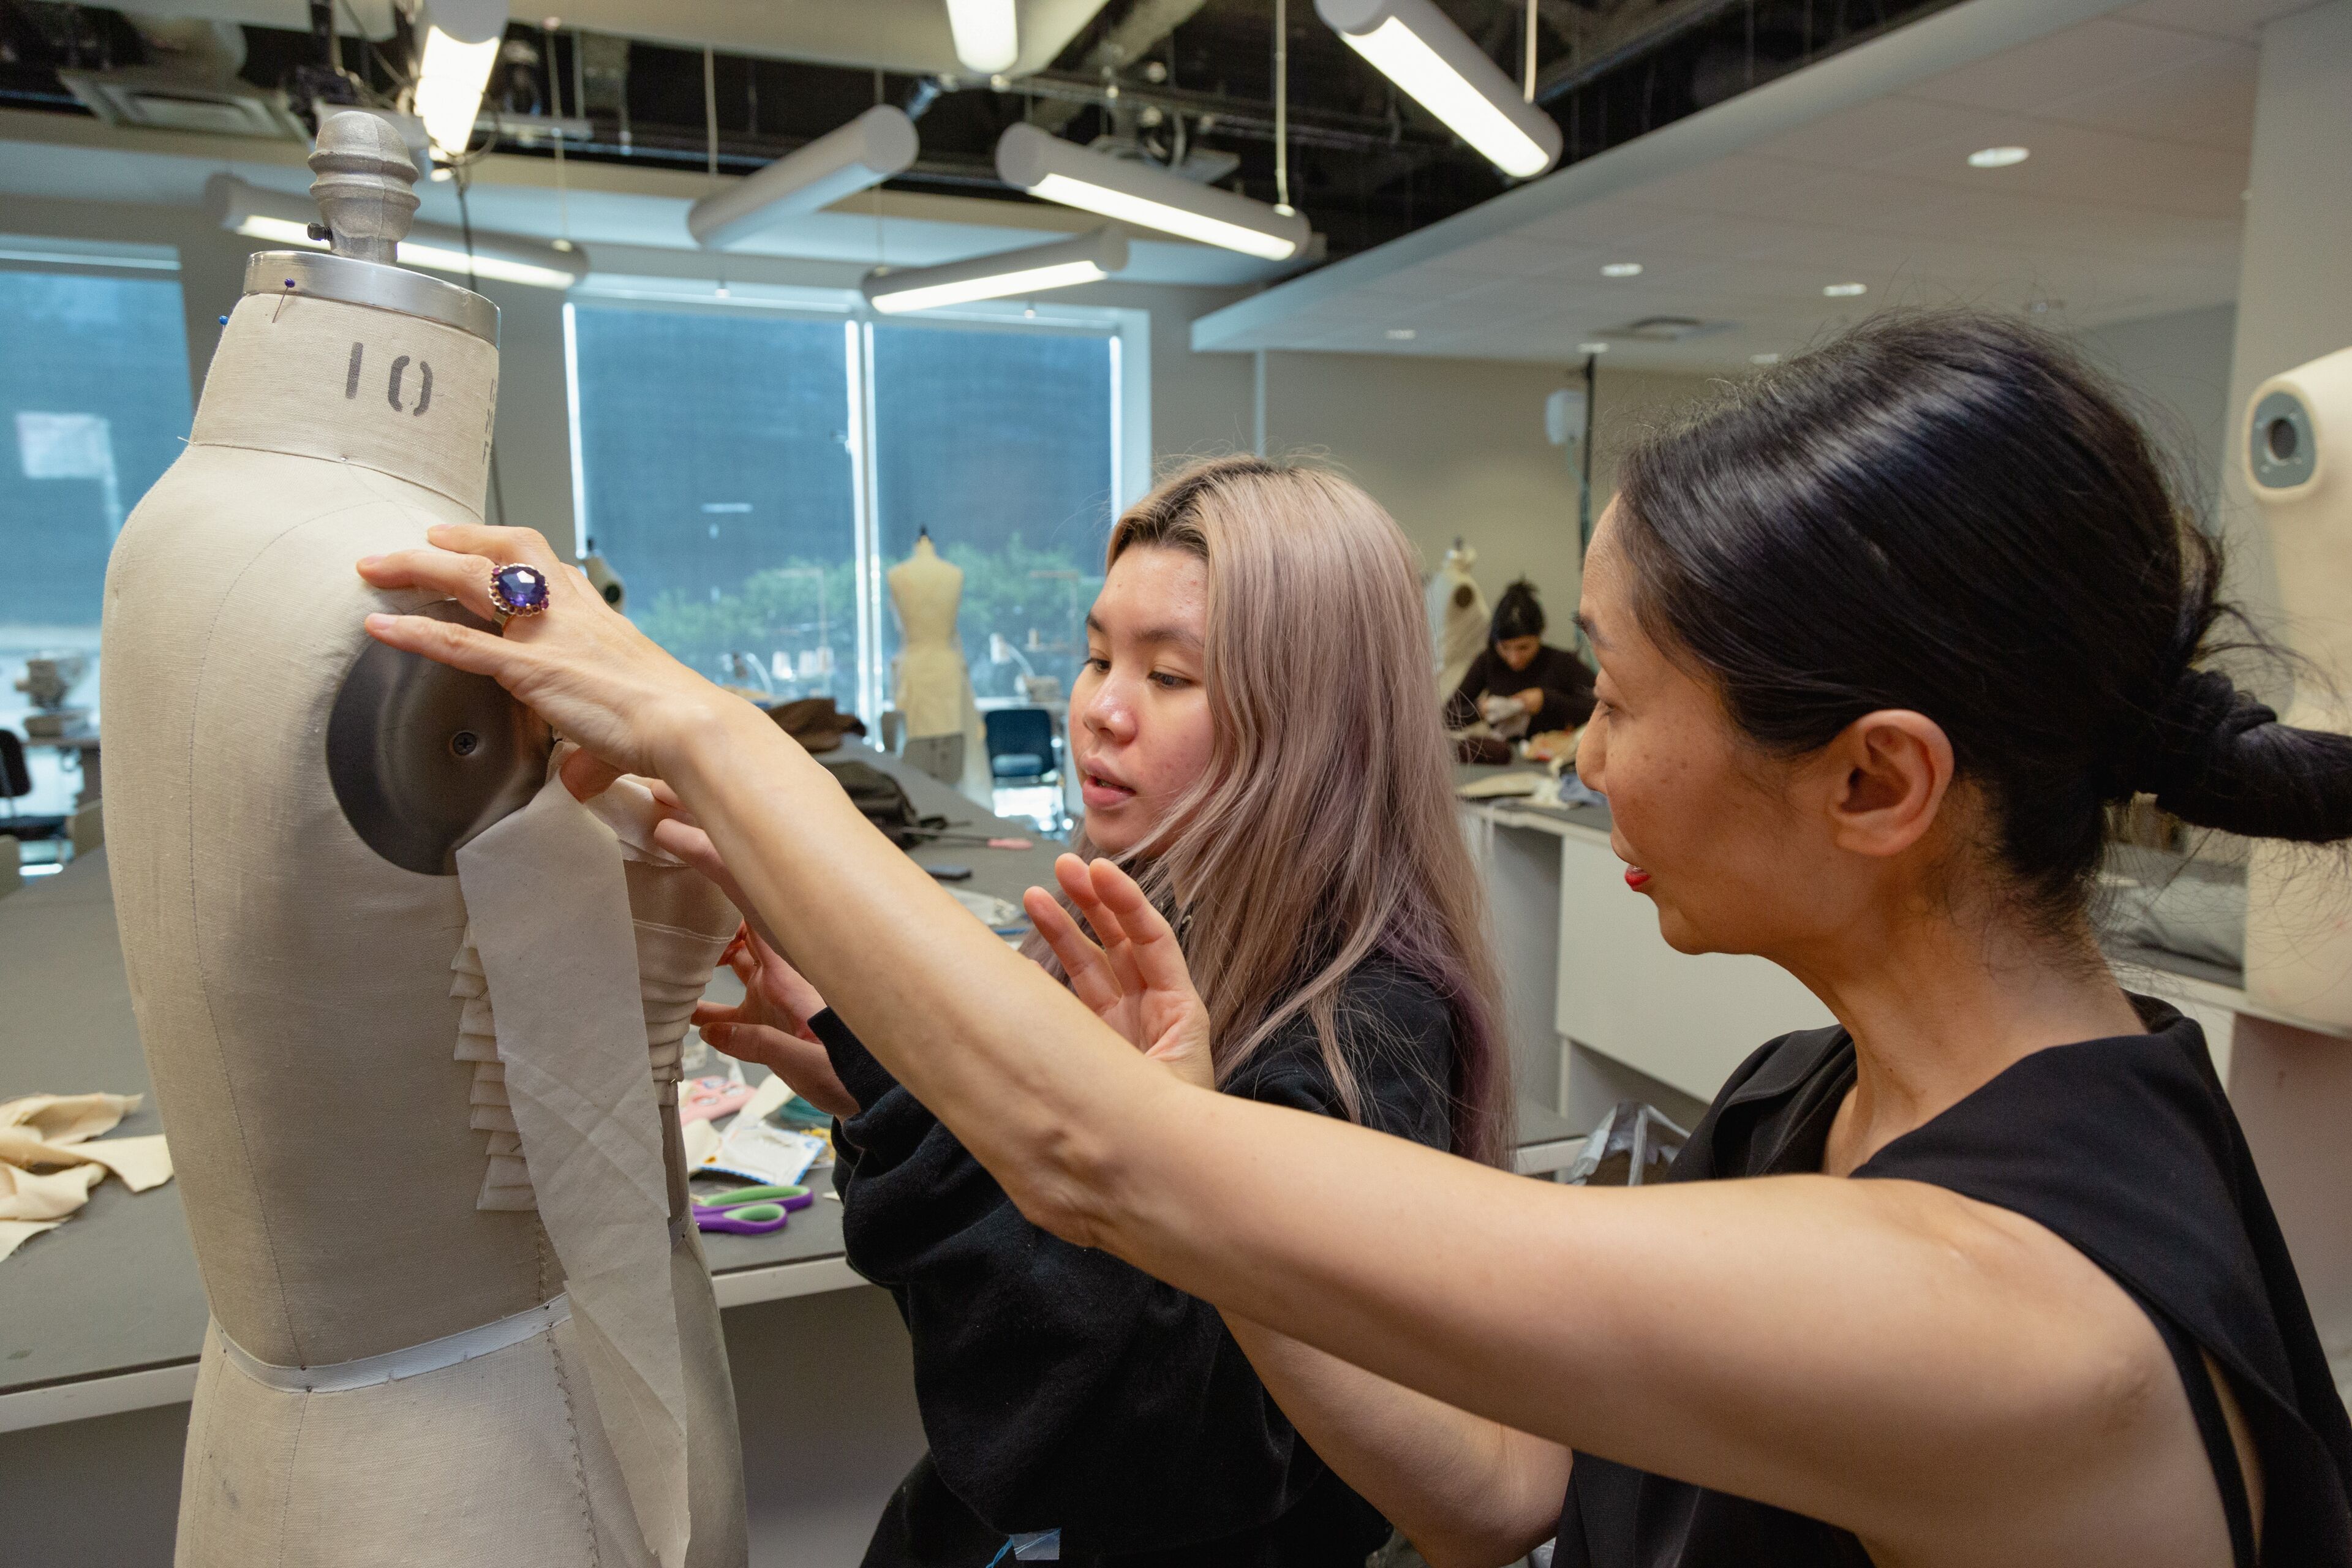 An experienced tailor instructs a young designer on dress fitting techniques on a mannequin.